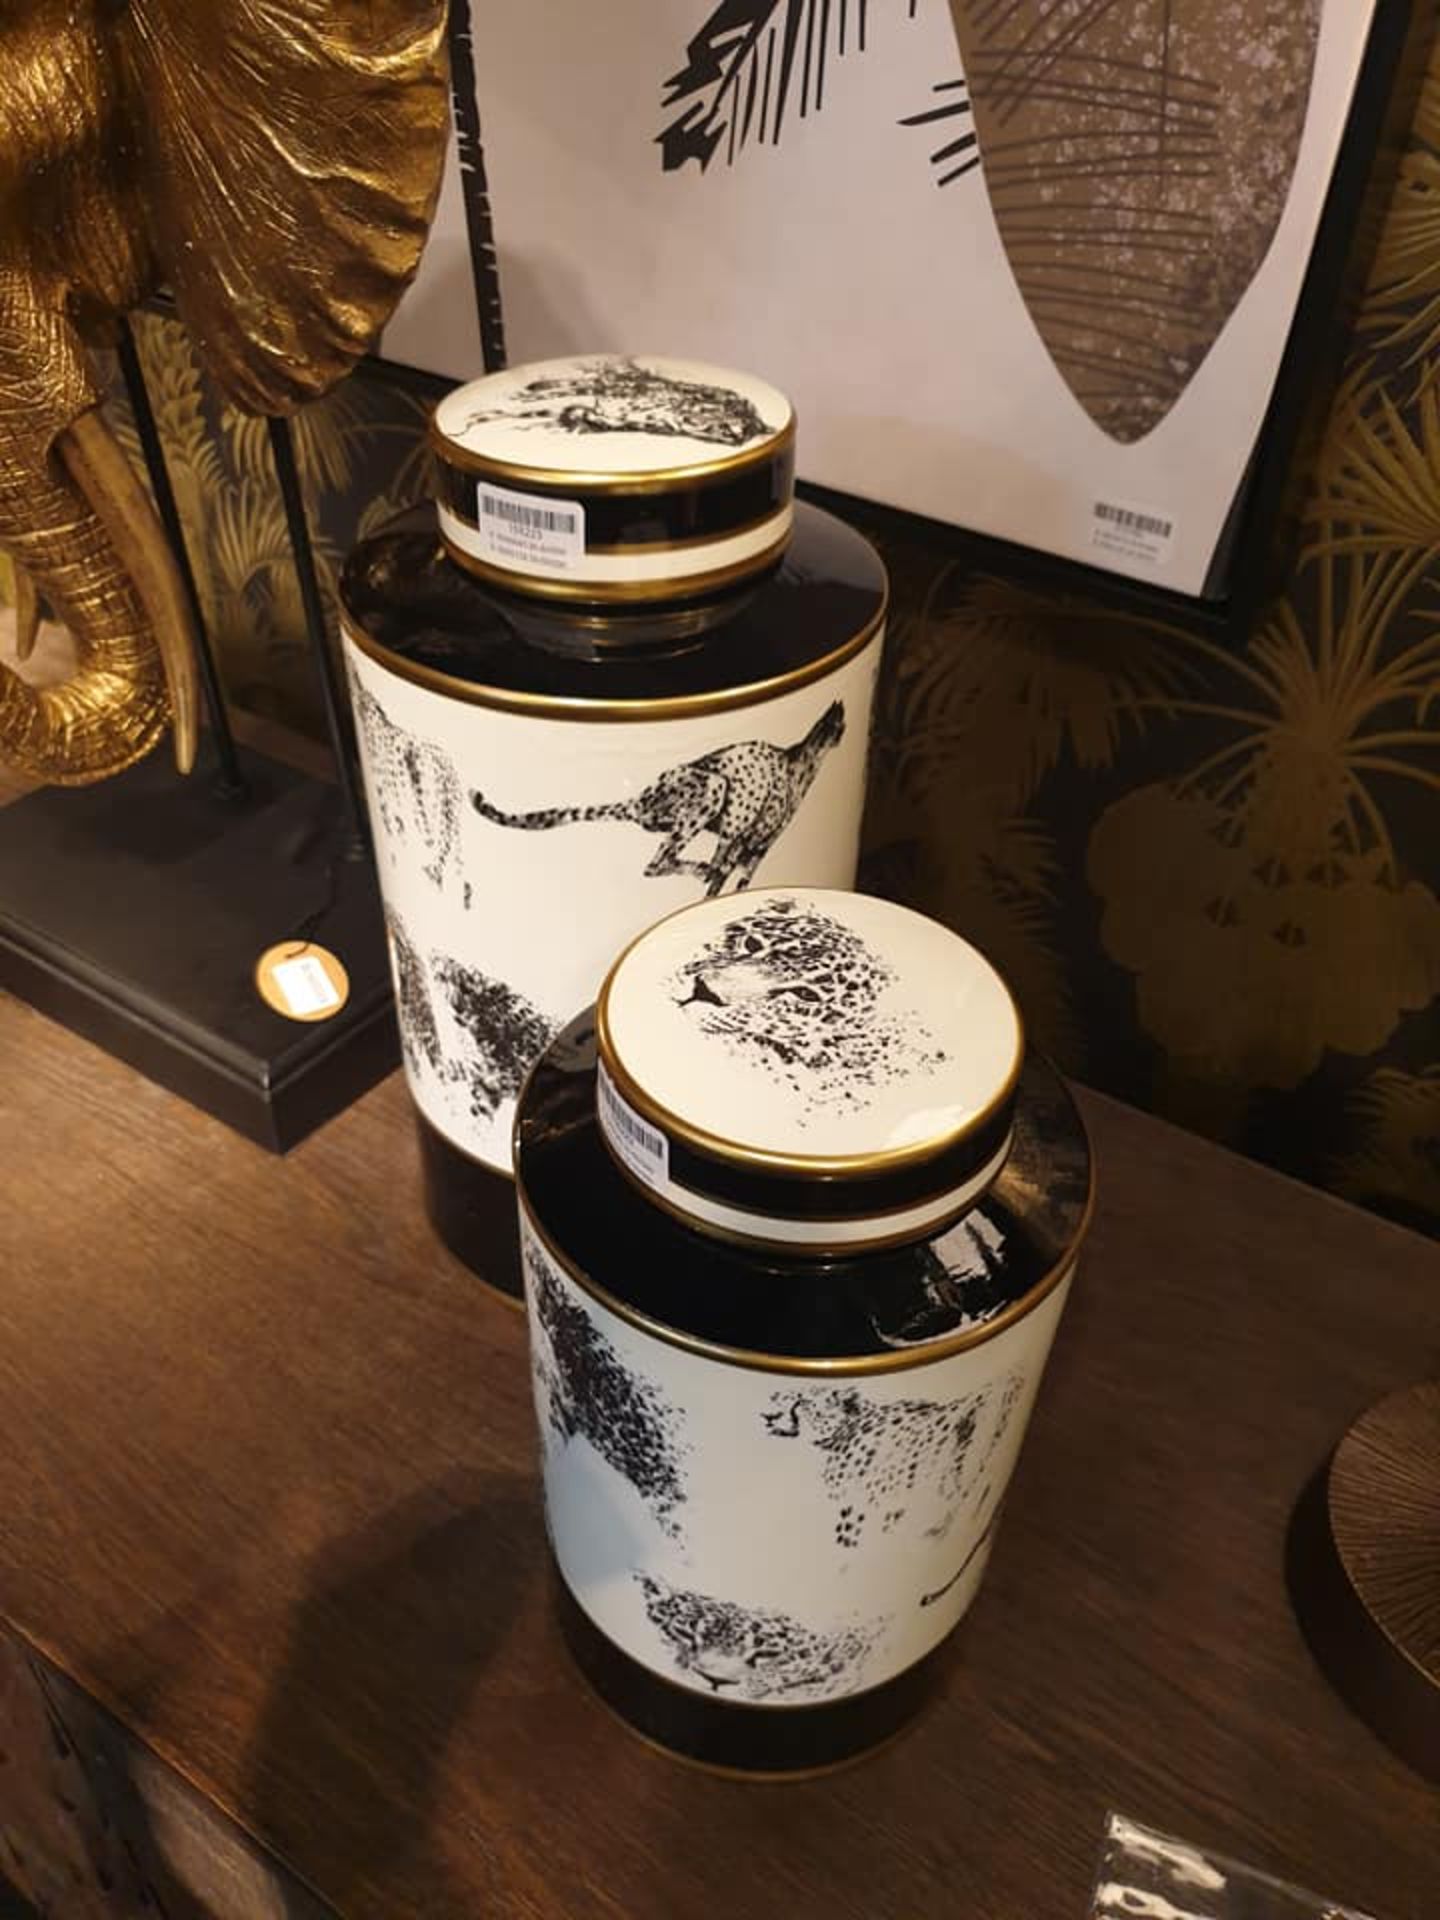 Safari - A Set Of 2 Stunning Porcelain Canisters In Black, White And Gold Rims Handmade Porcelain - Image 2 of 3